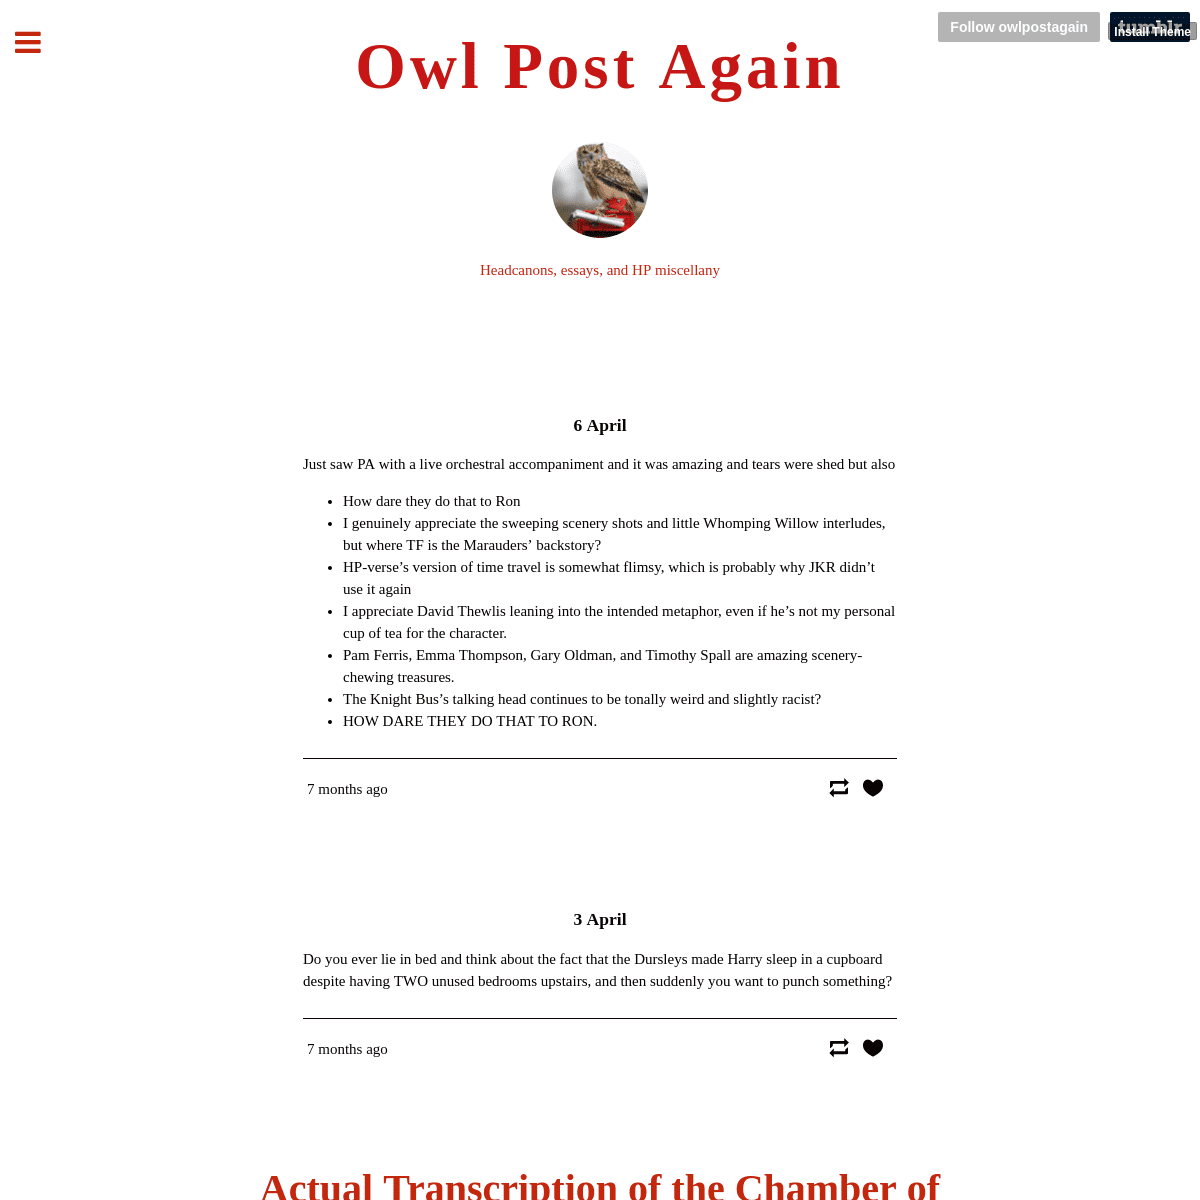 A complete backup of owlpostagain.tumblr.com